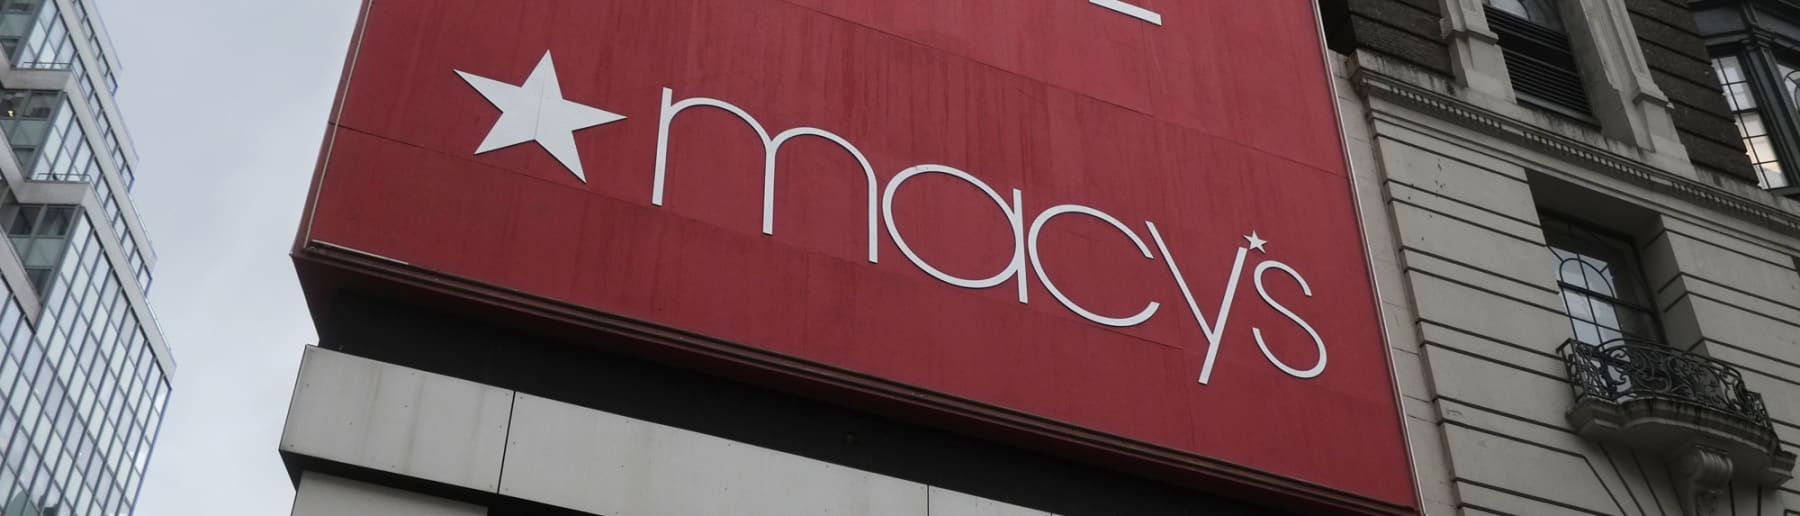 Red and white Macy's sign on side of building.